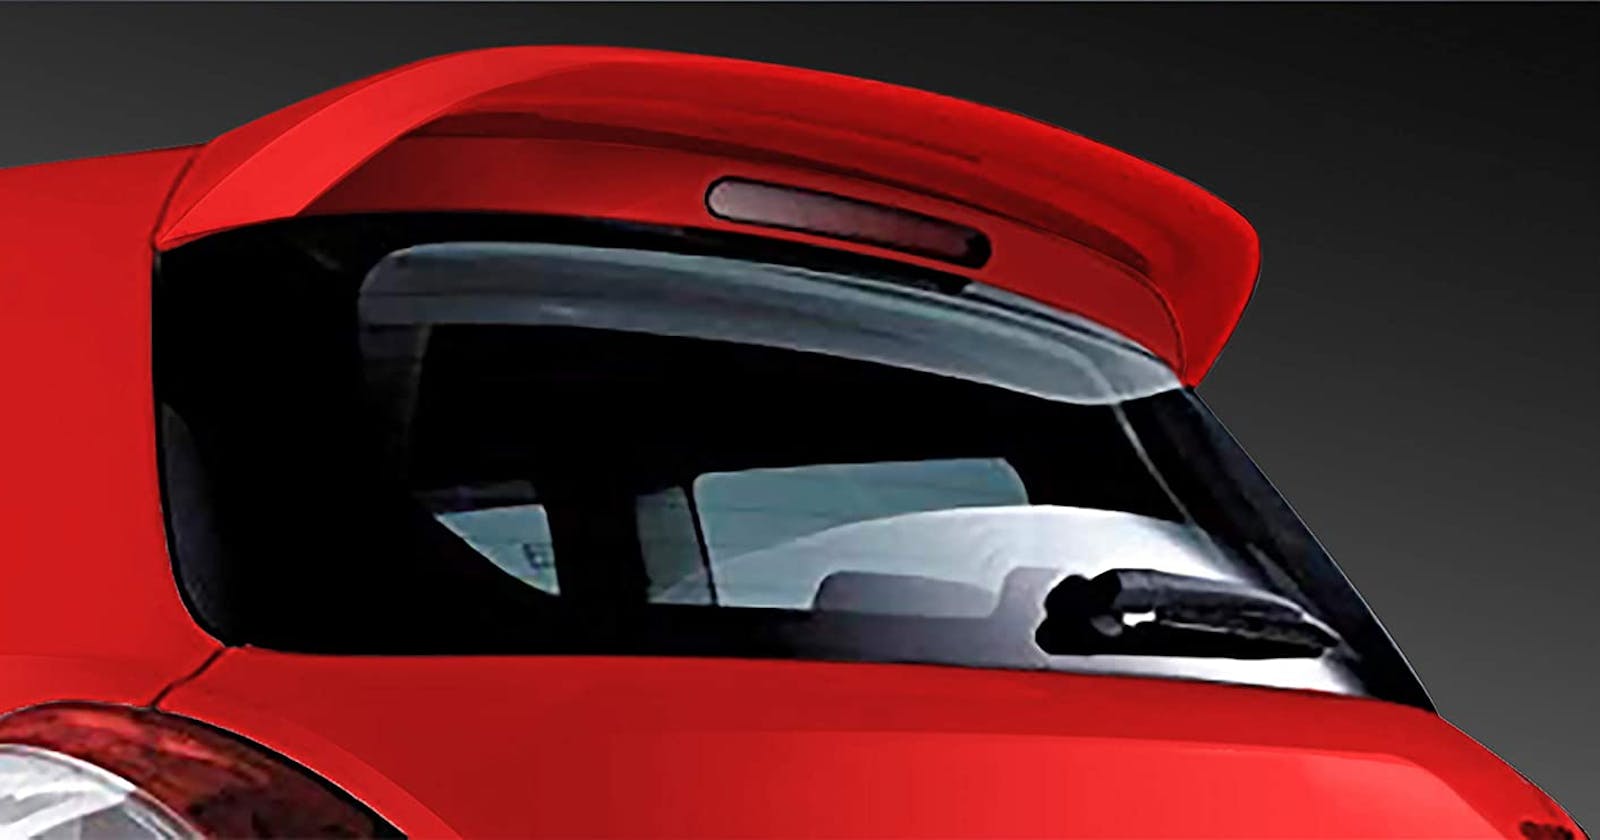 Rear Spoiler Market 2022, Growth, Demand, Size And Forecast Report 2027